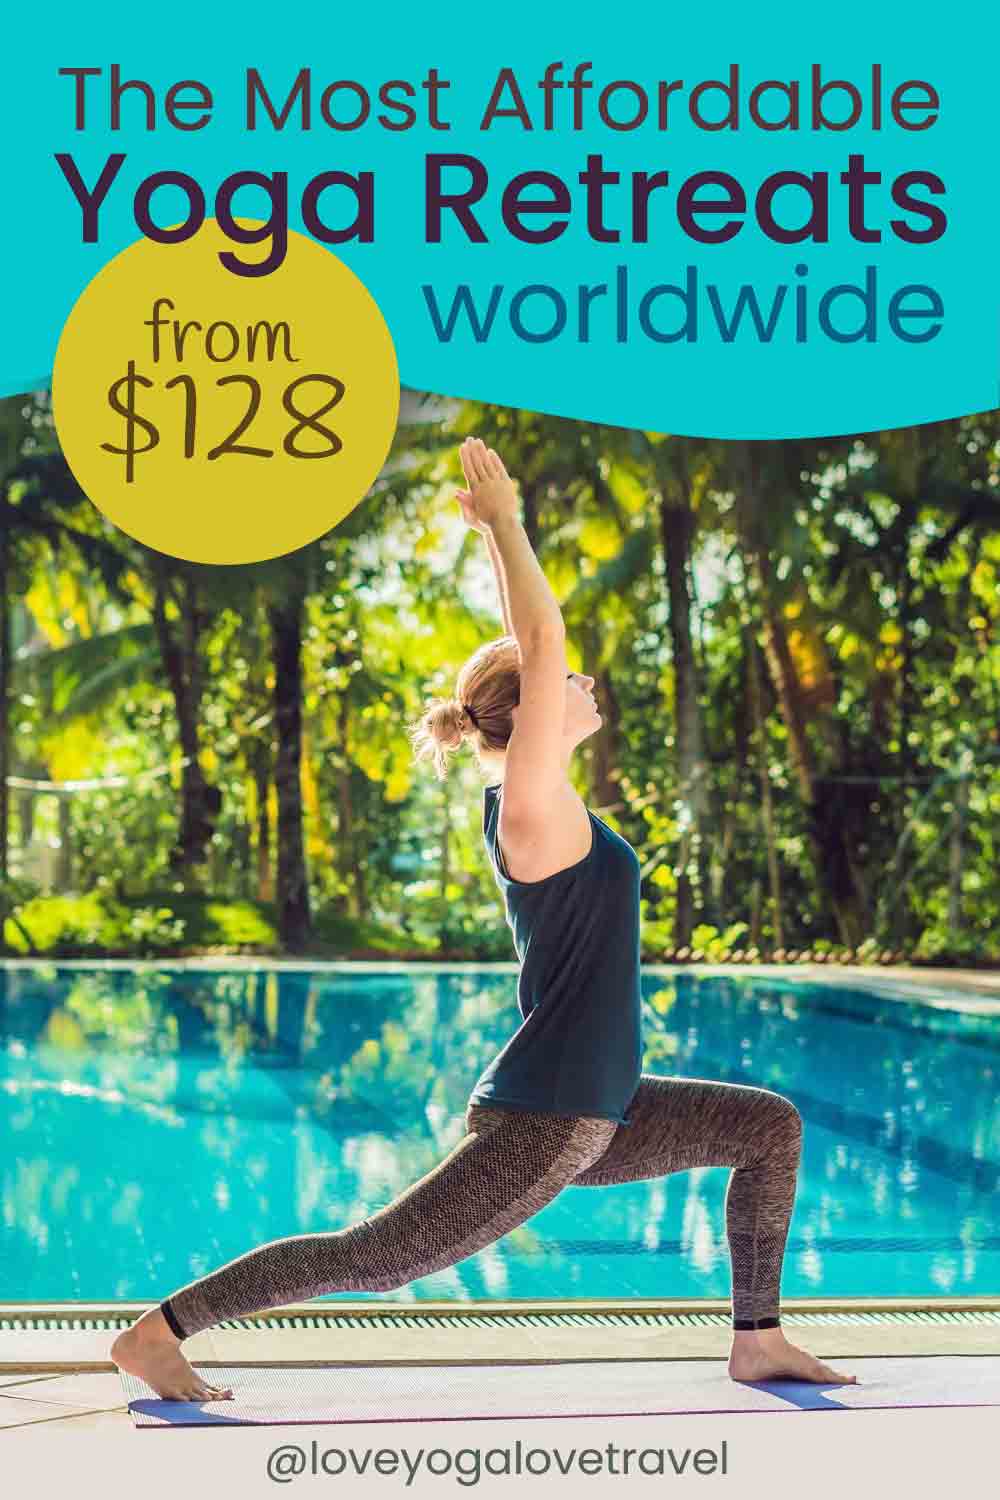 Pin Me! "The Most Affordable Yoga Retreats in the World"